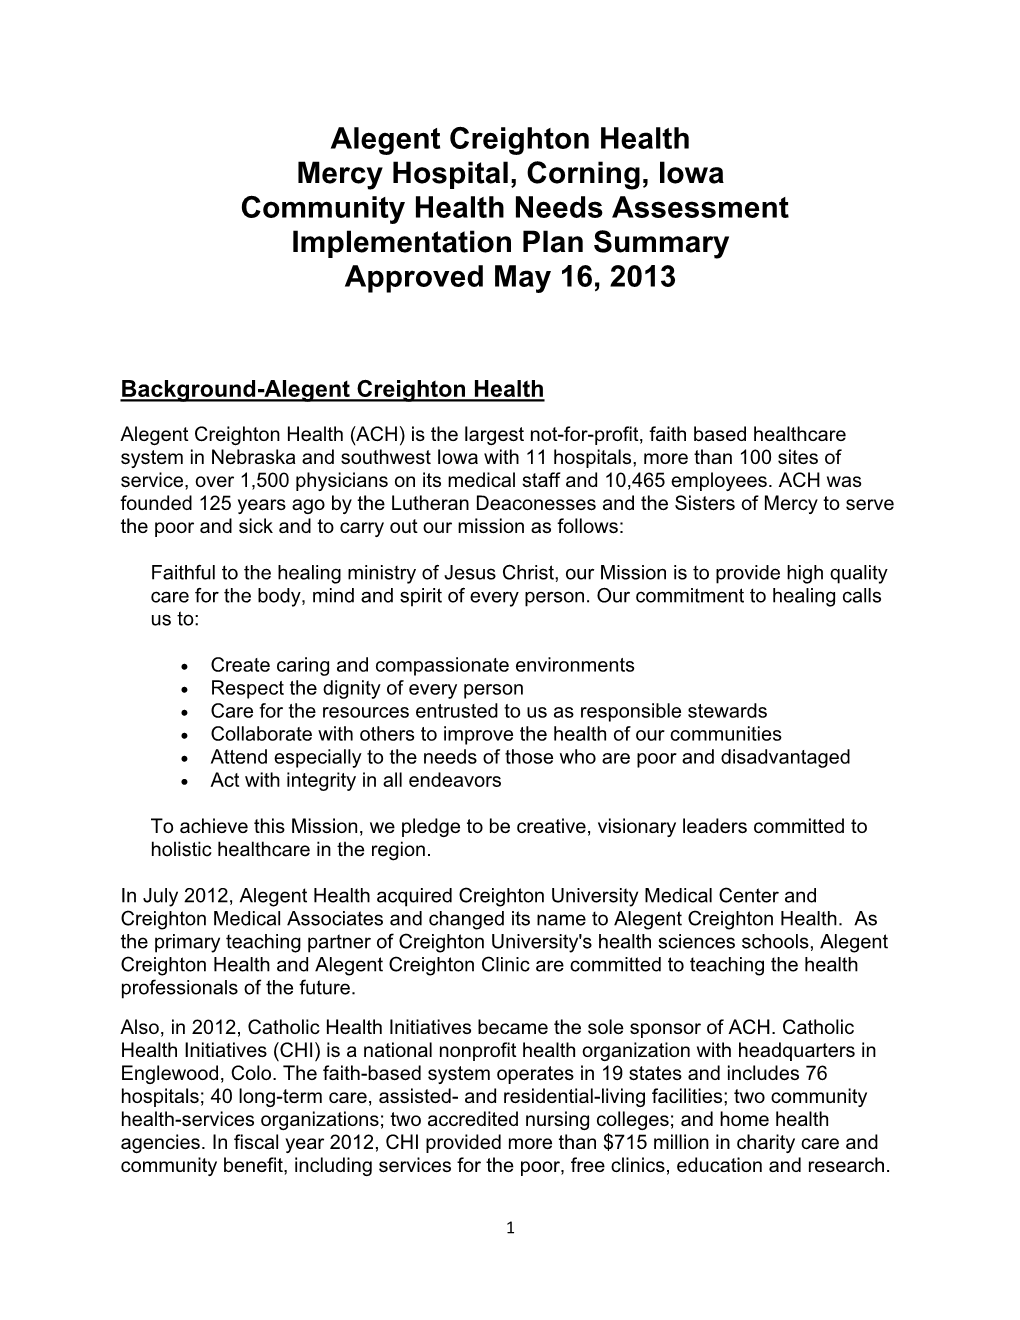 Alegent Creighton Health Mercy Hospital, Corning, Iowa Community Health Needs Assessment Implementation Plan Summary Approved May 16, 2013